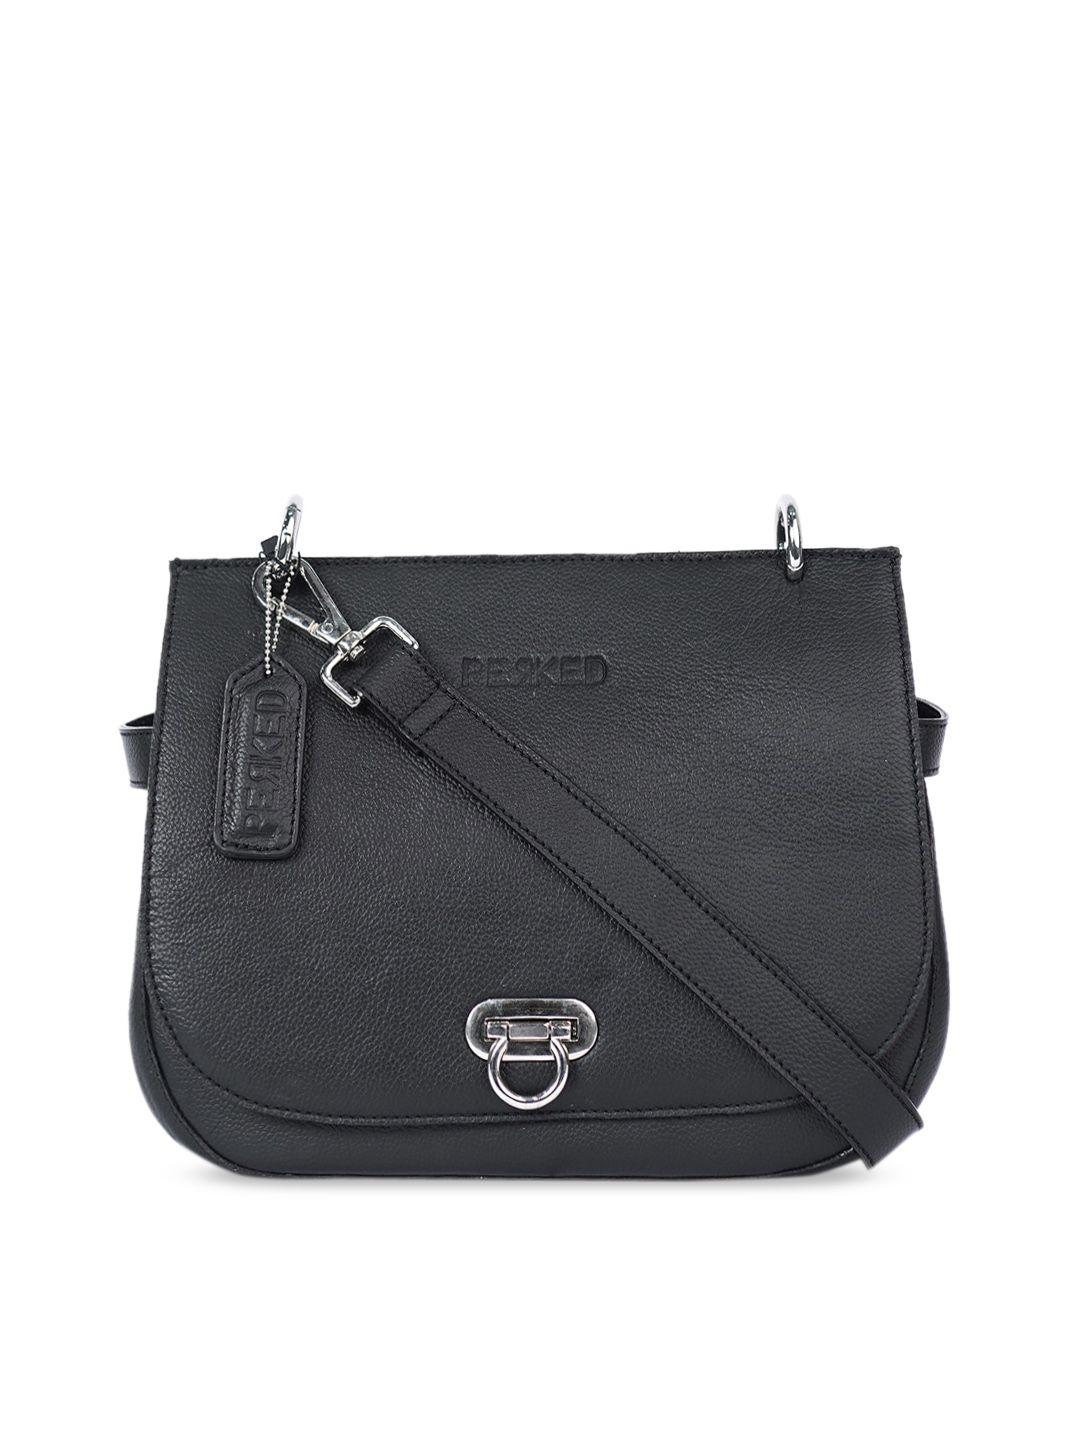 perked black leather swagger sling bag